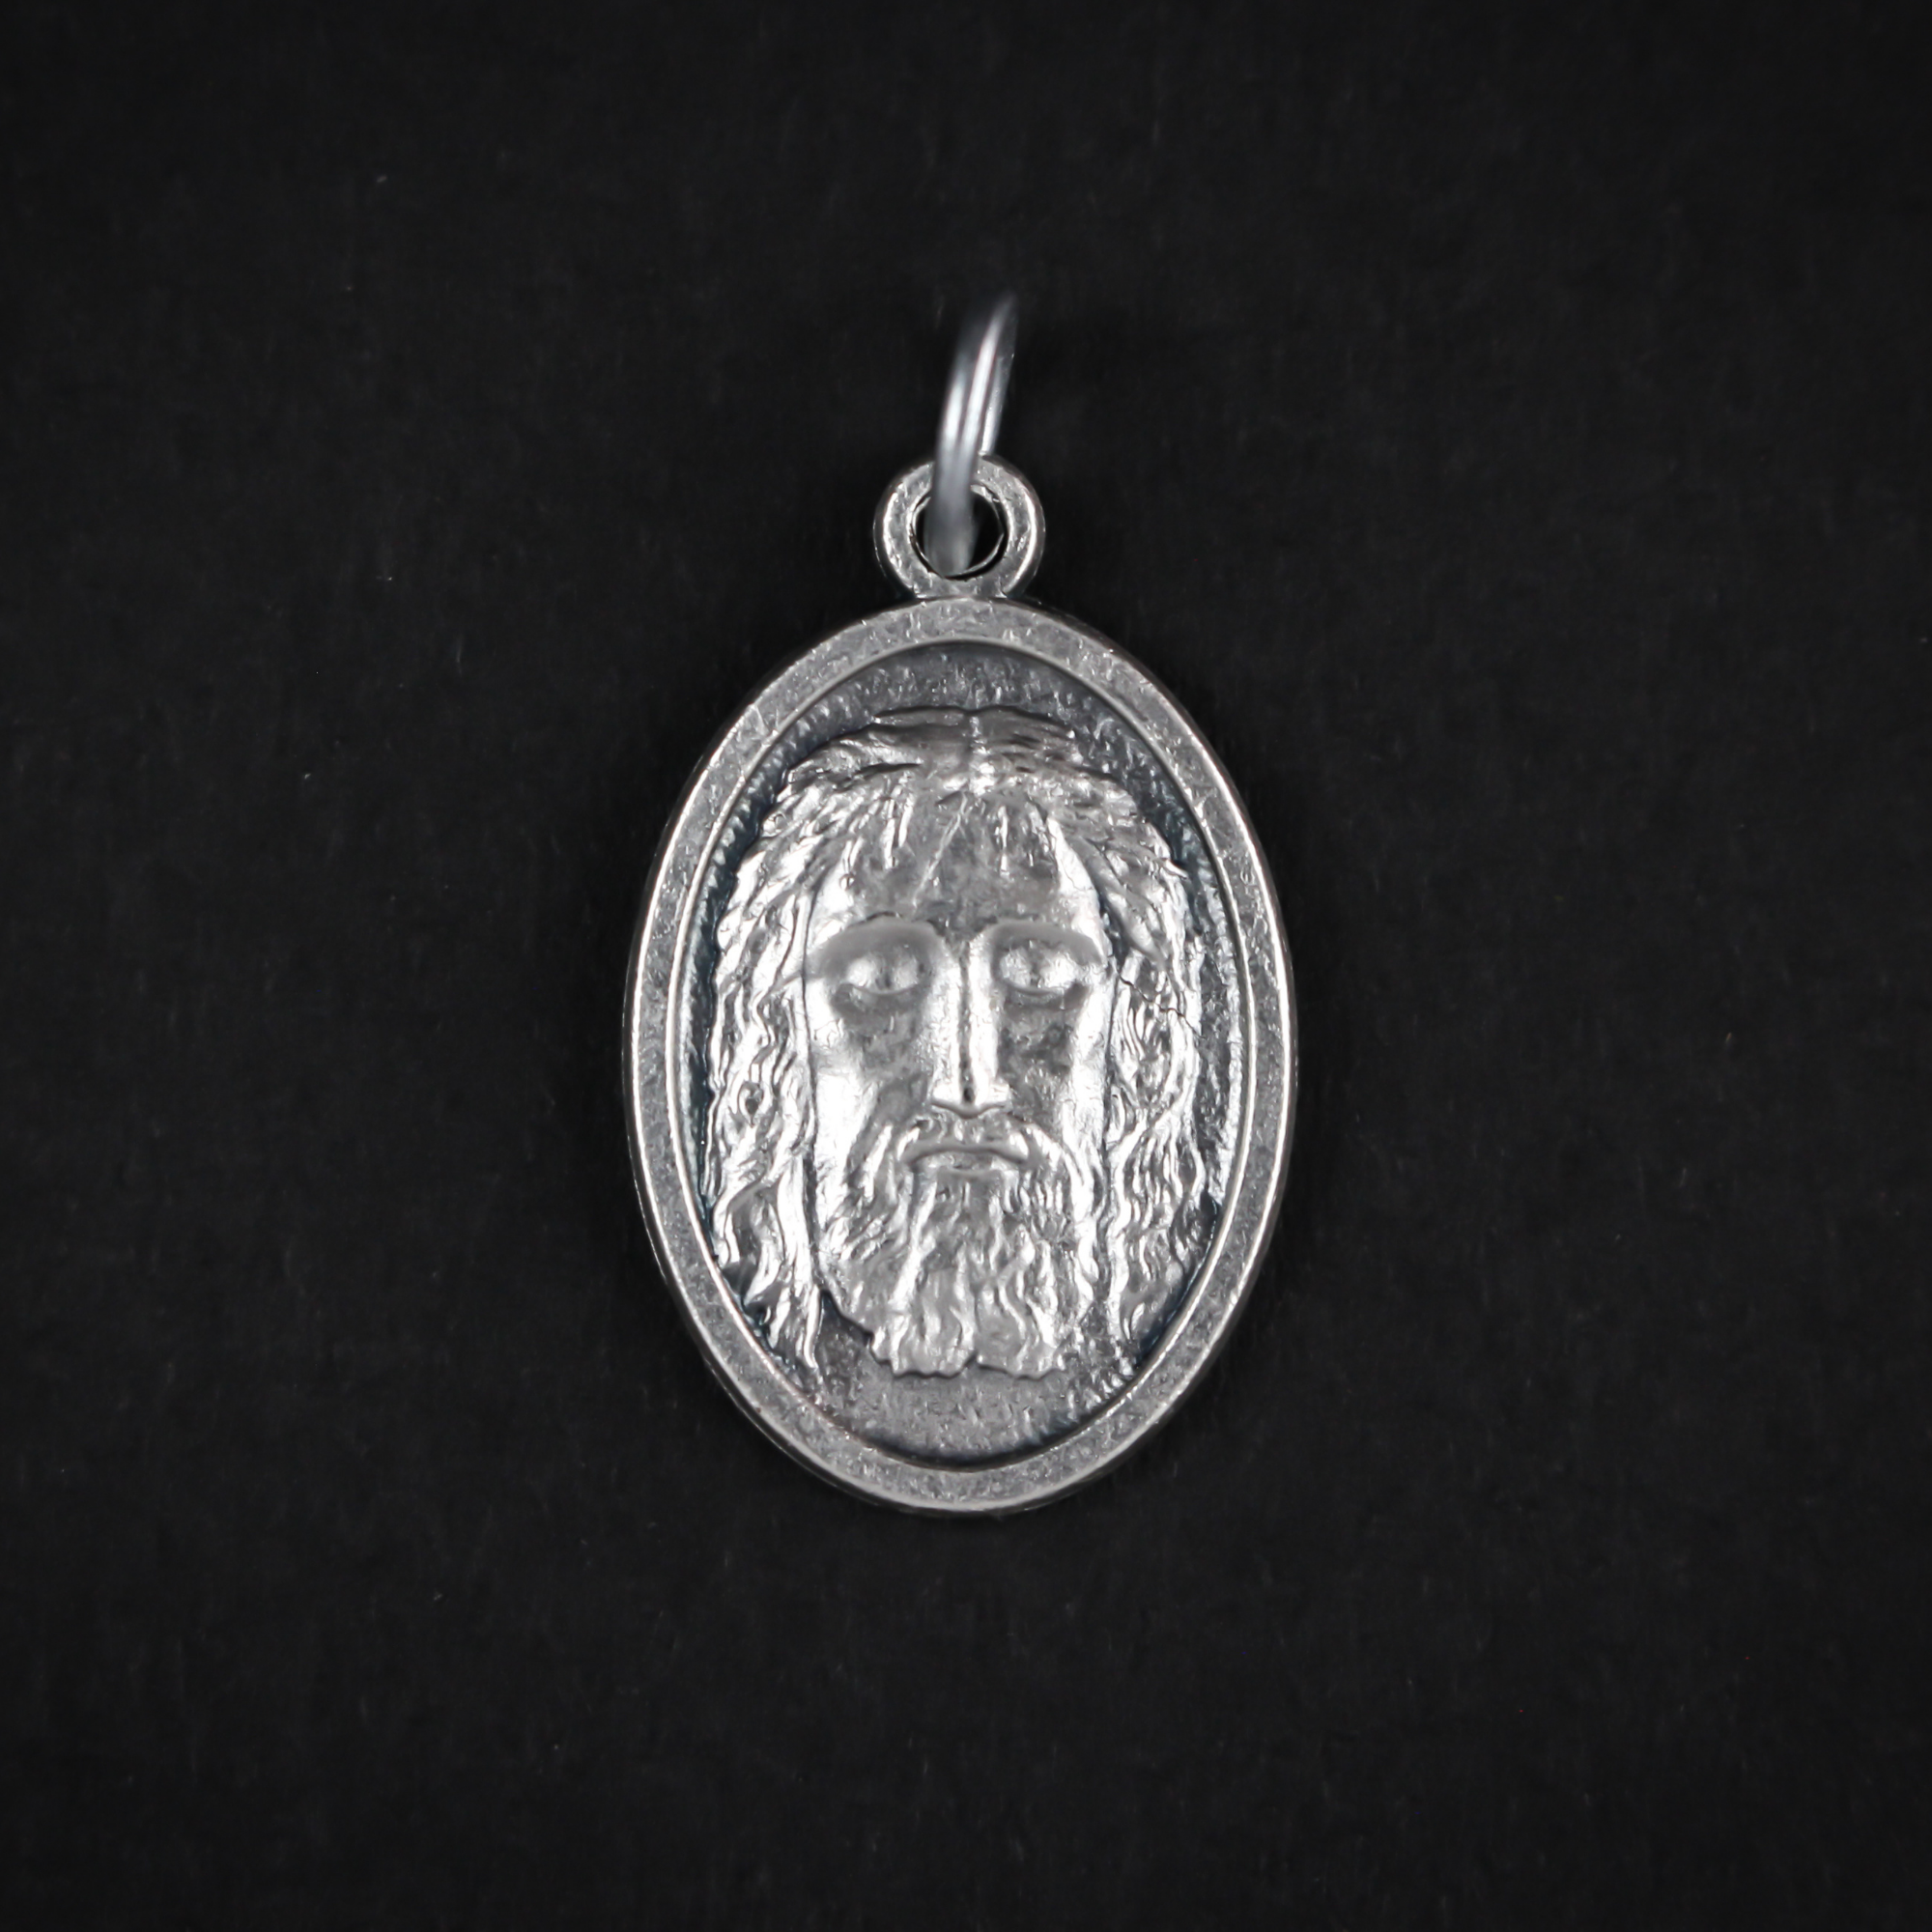 The Holy face of Jesus medal after the Holy shroud of Turin